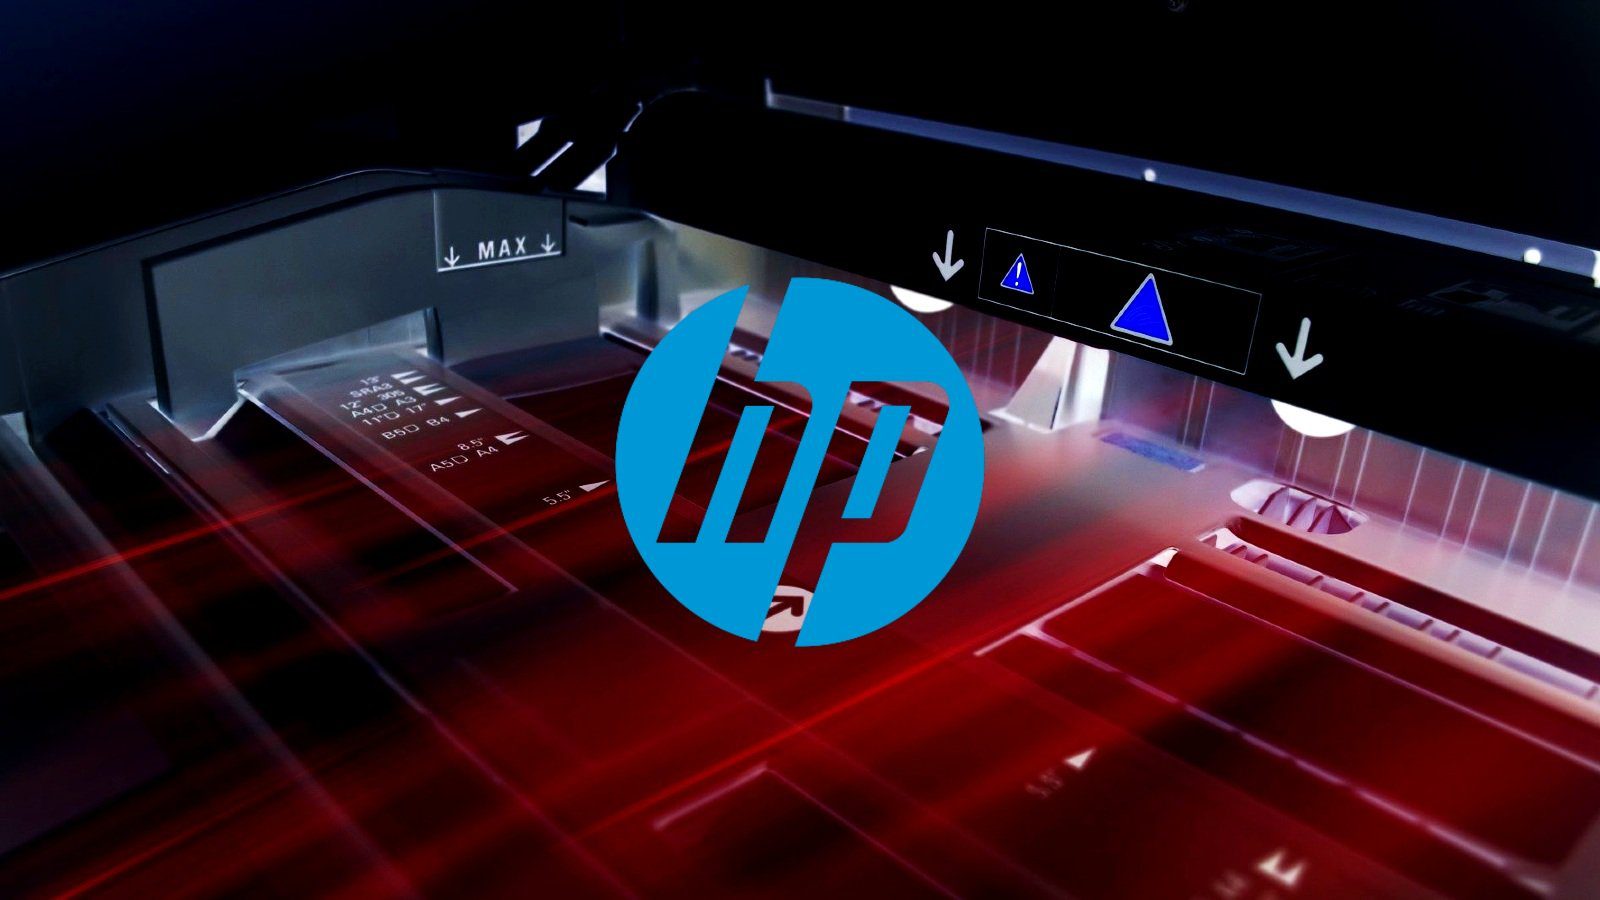 HP rushes to fix bricked printers after faulty firmware update – Source: www.bleepingcomputer.com